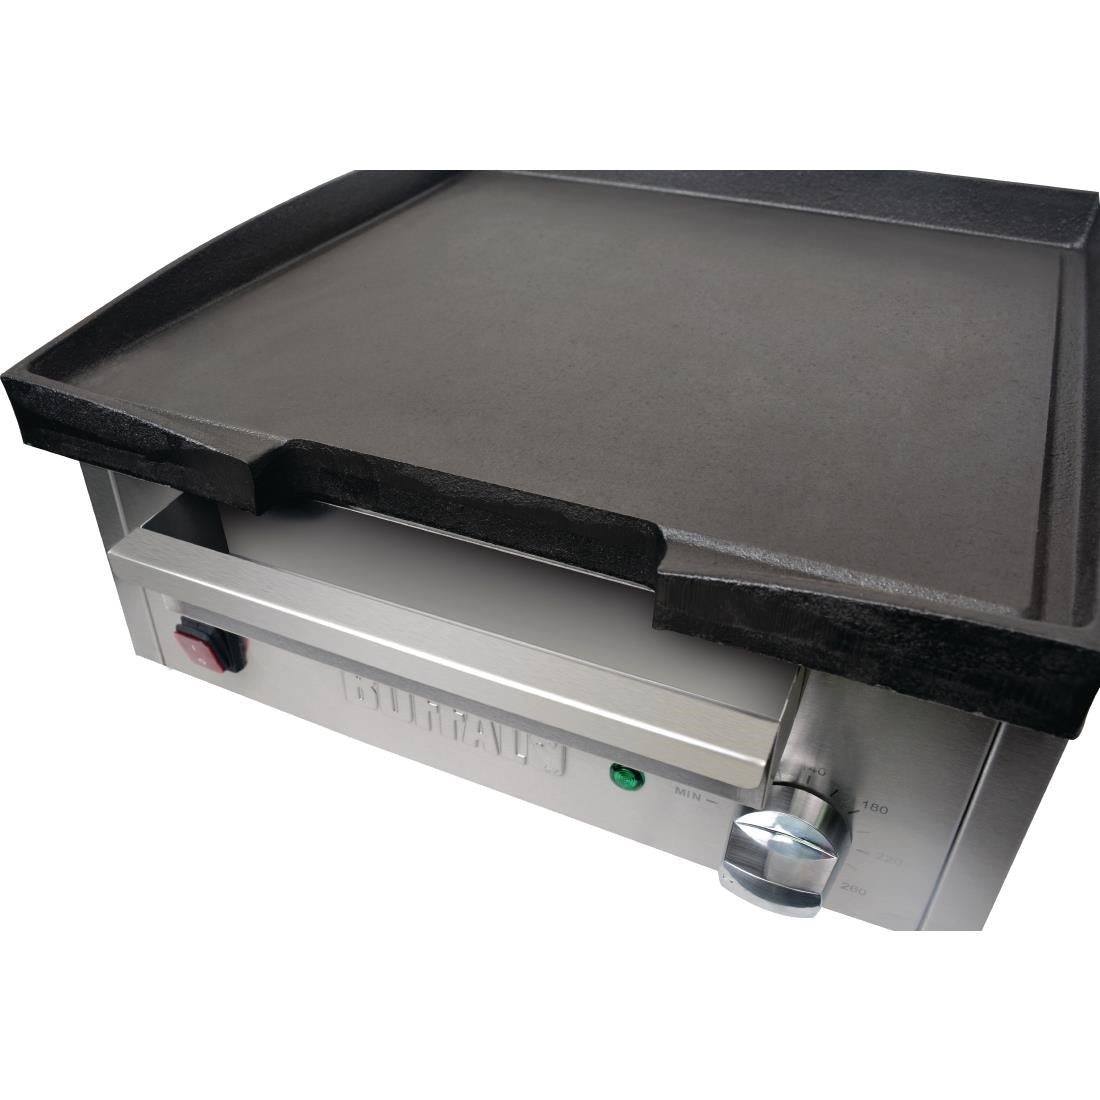 DC901 Buffalo Large Cast Iron Countertop Electric Griddle